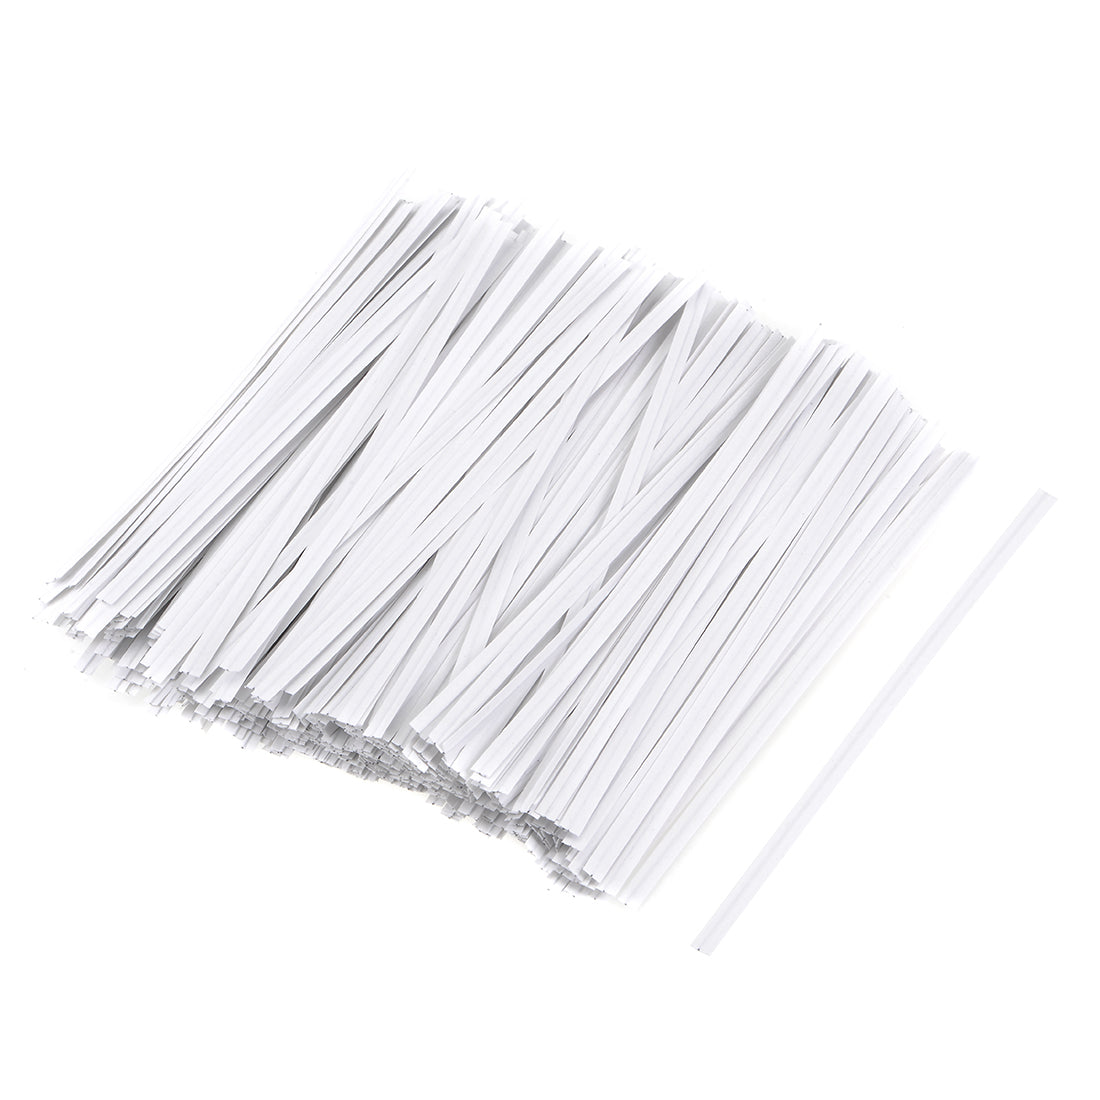 uxcell Uxcell Long Strong Twist Ties 3.15 Inches Quality  Closure Tie for Tying Gift Bags Art Craft Ties Manage Cords White 1000pcs